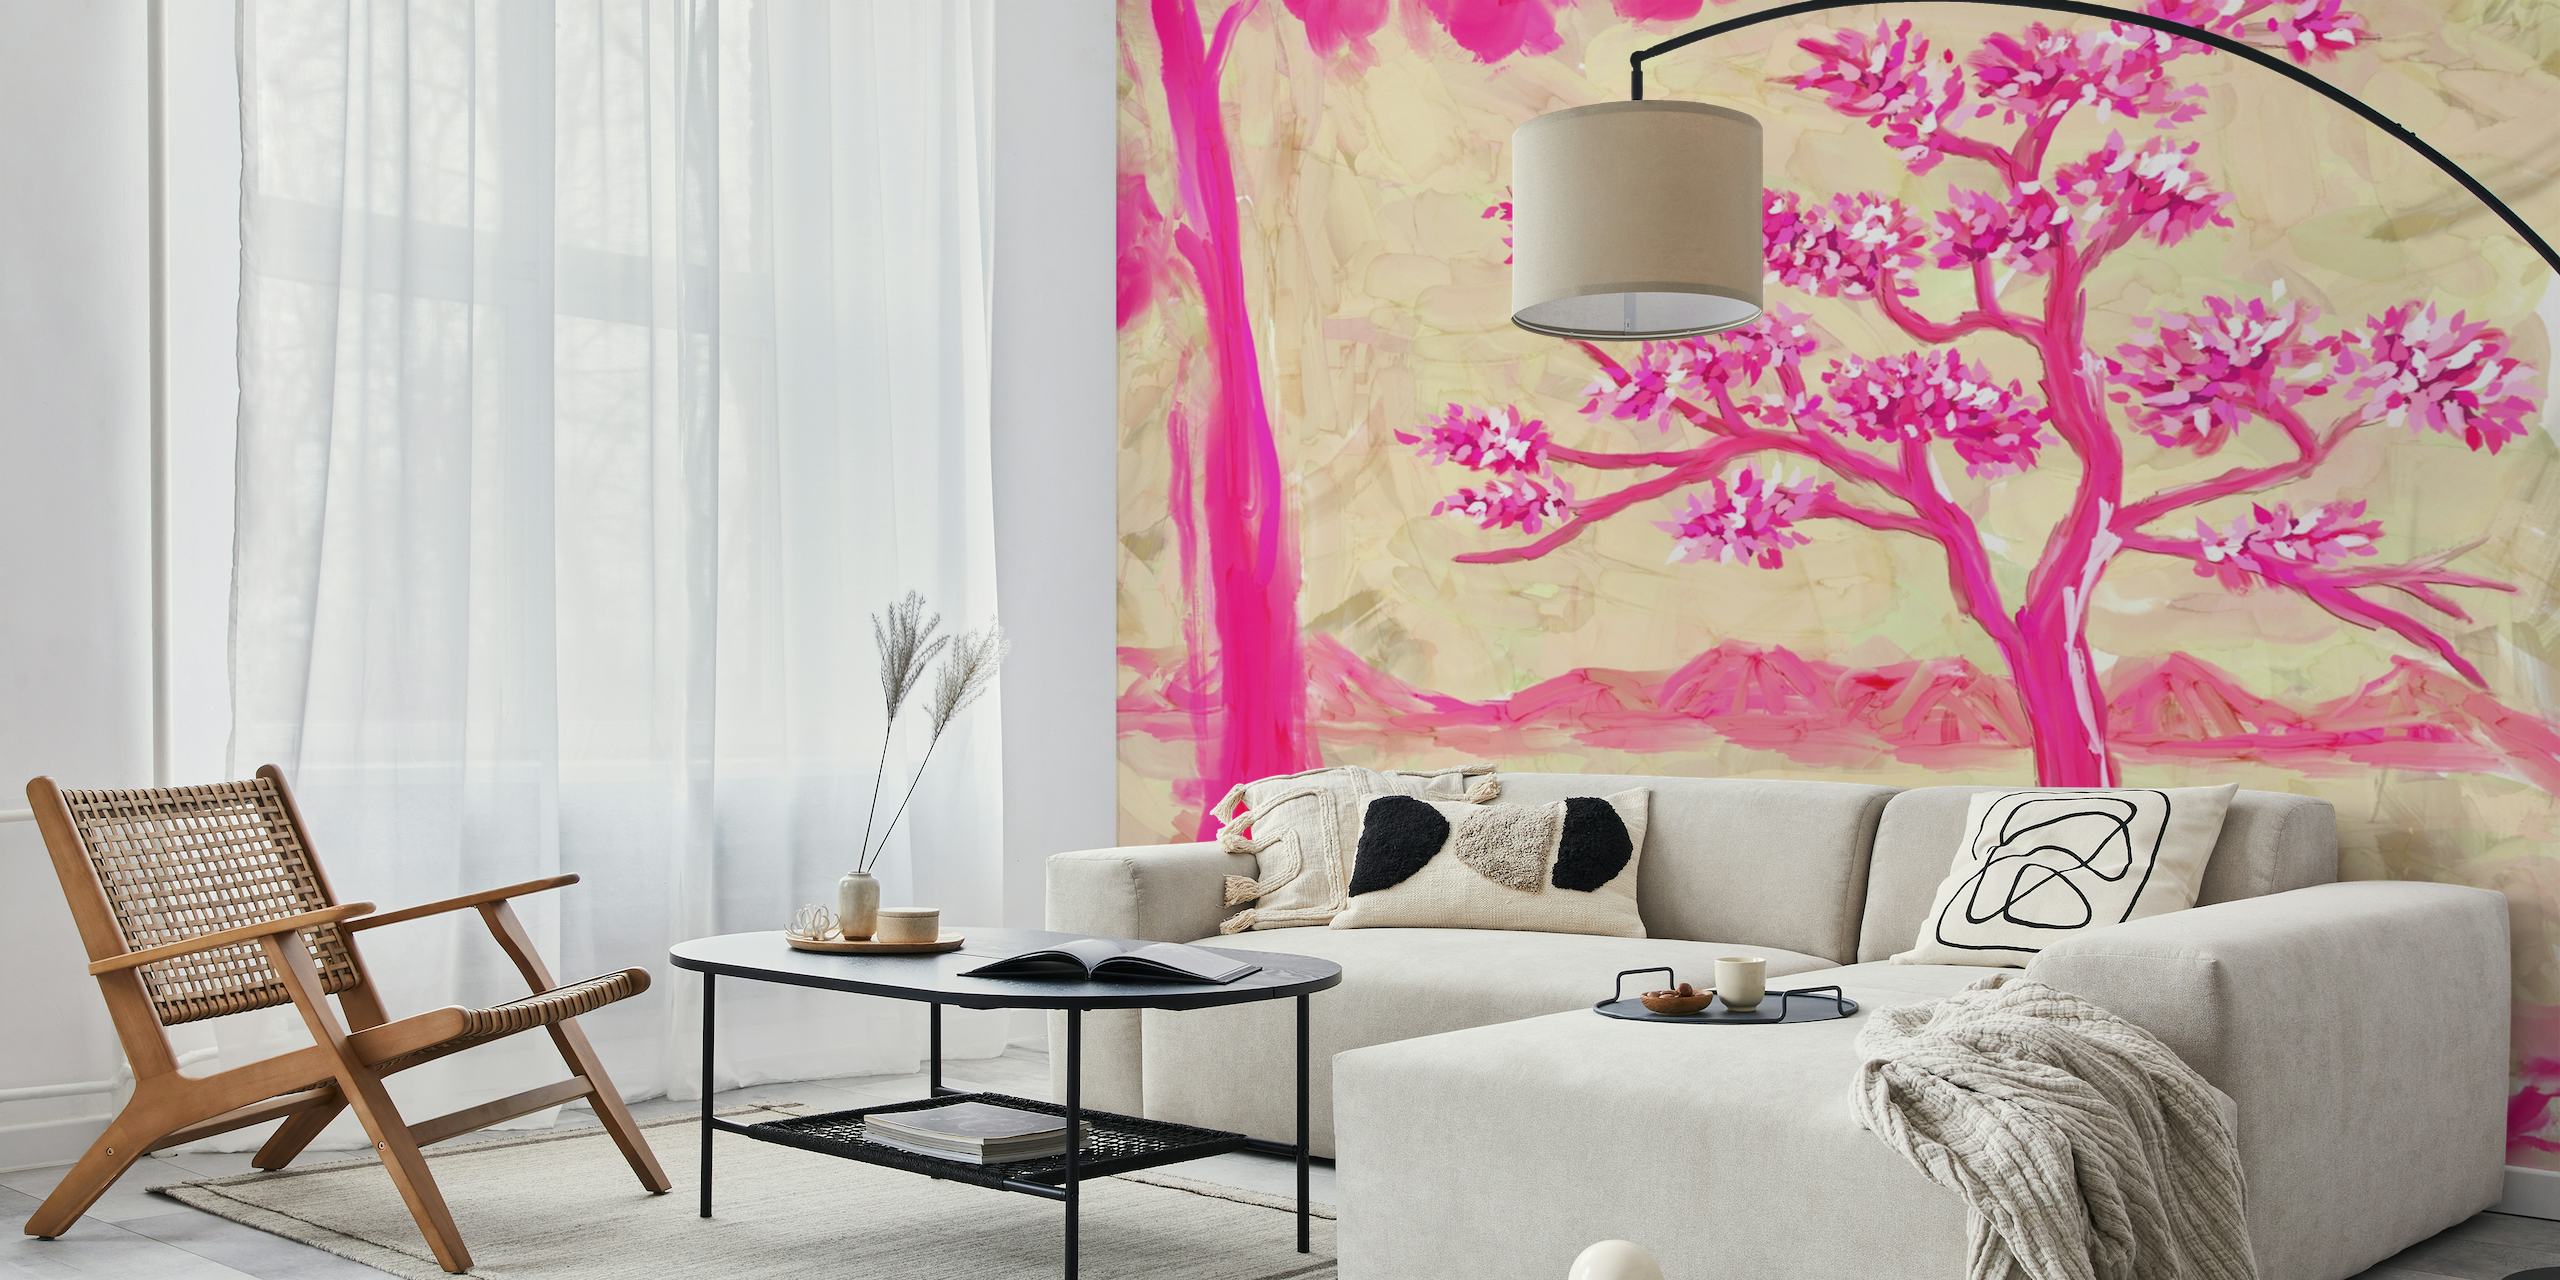 The Pink Tree wall mural with stylized vibrant pink tree on a mottled background